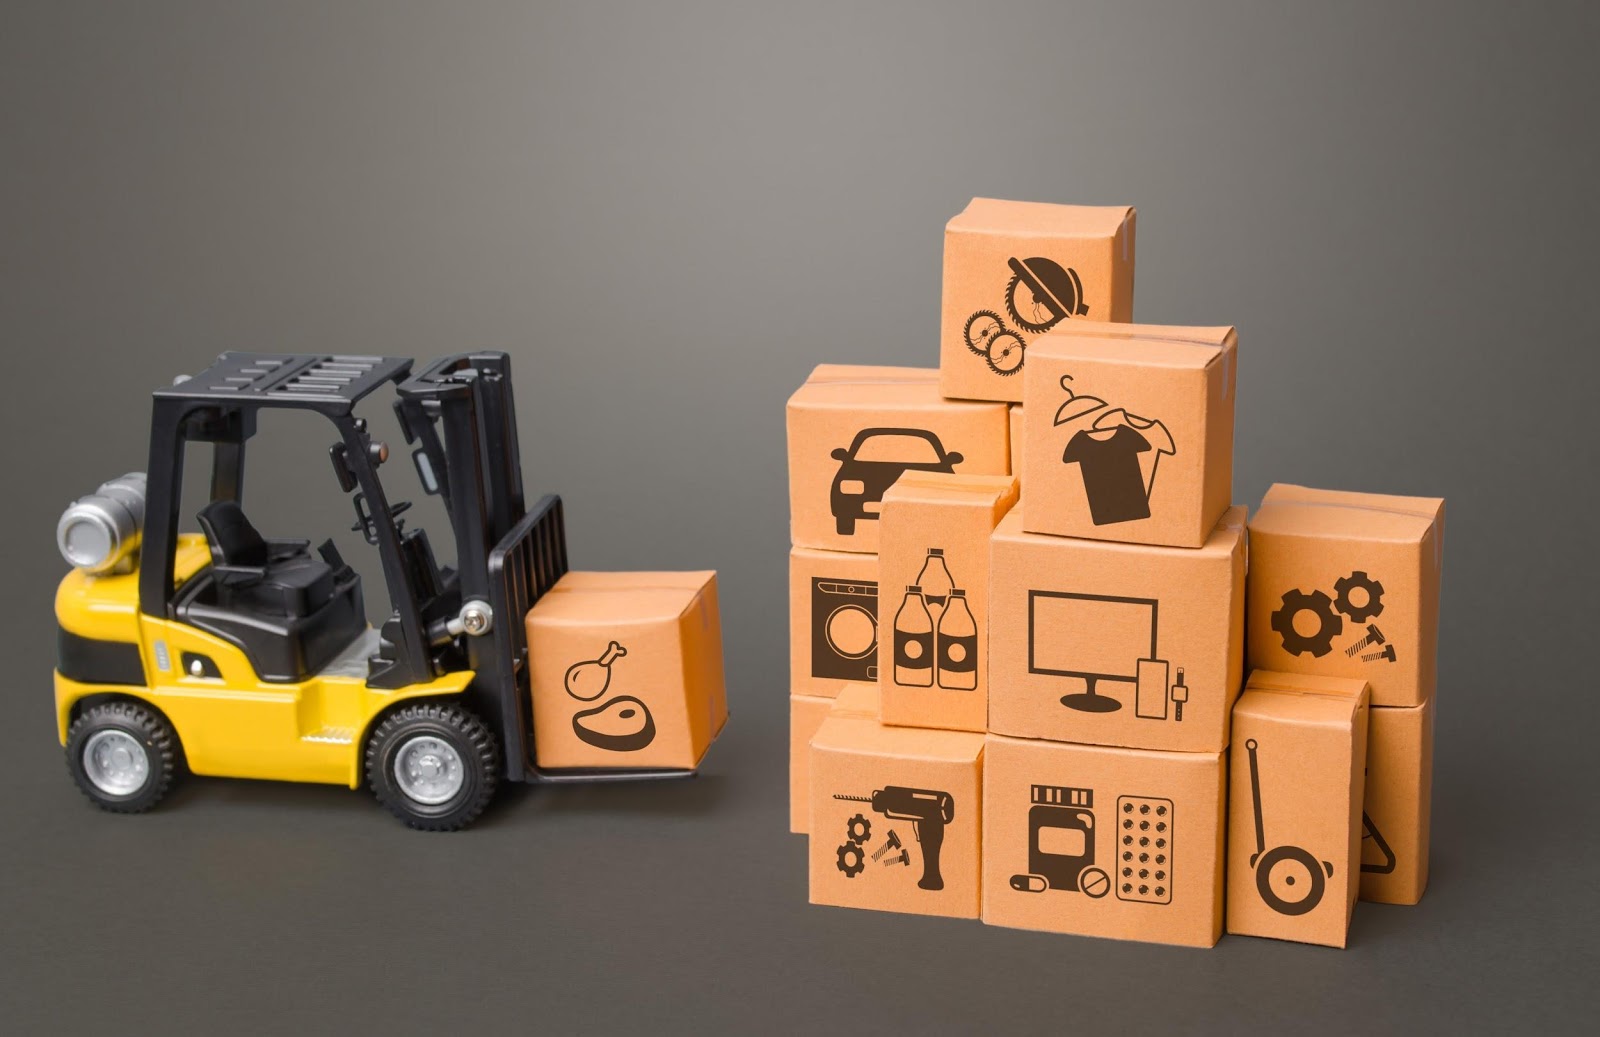 A toy forklift approaches toy boxes that each have symbols on them. Symbols include clothing, electronics, and tools. 